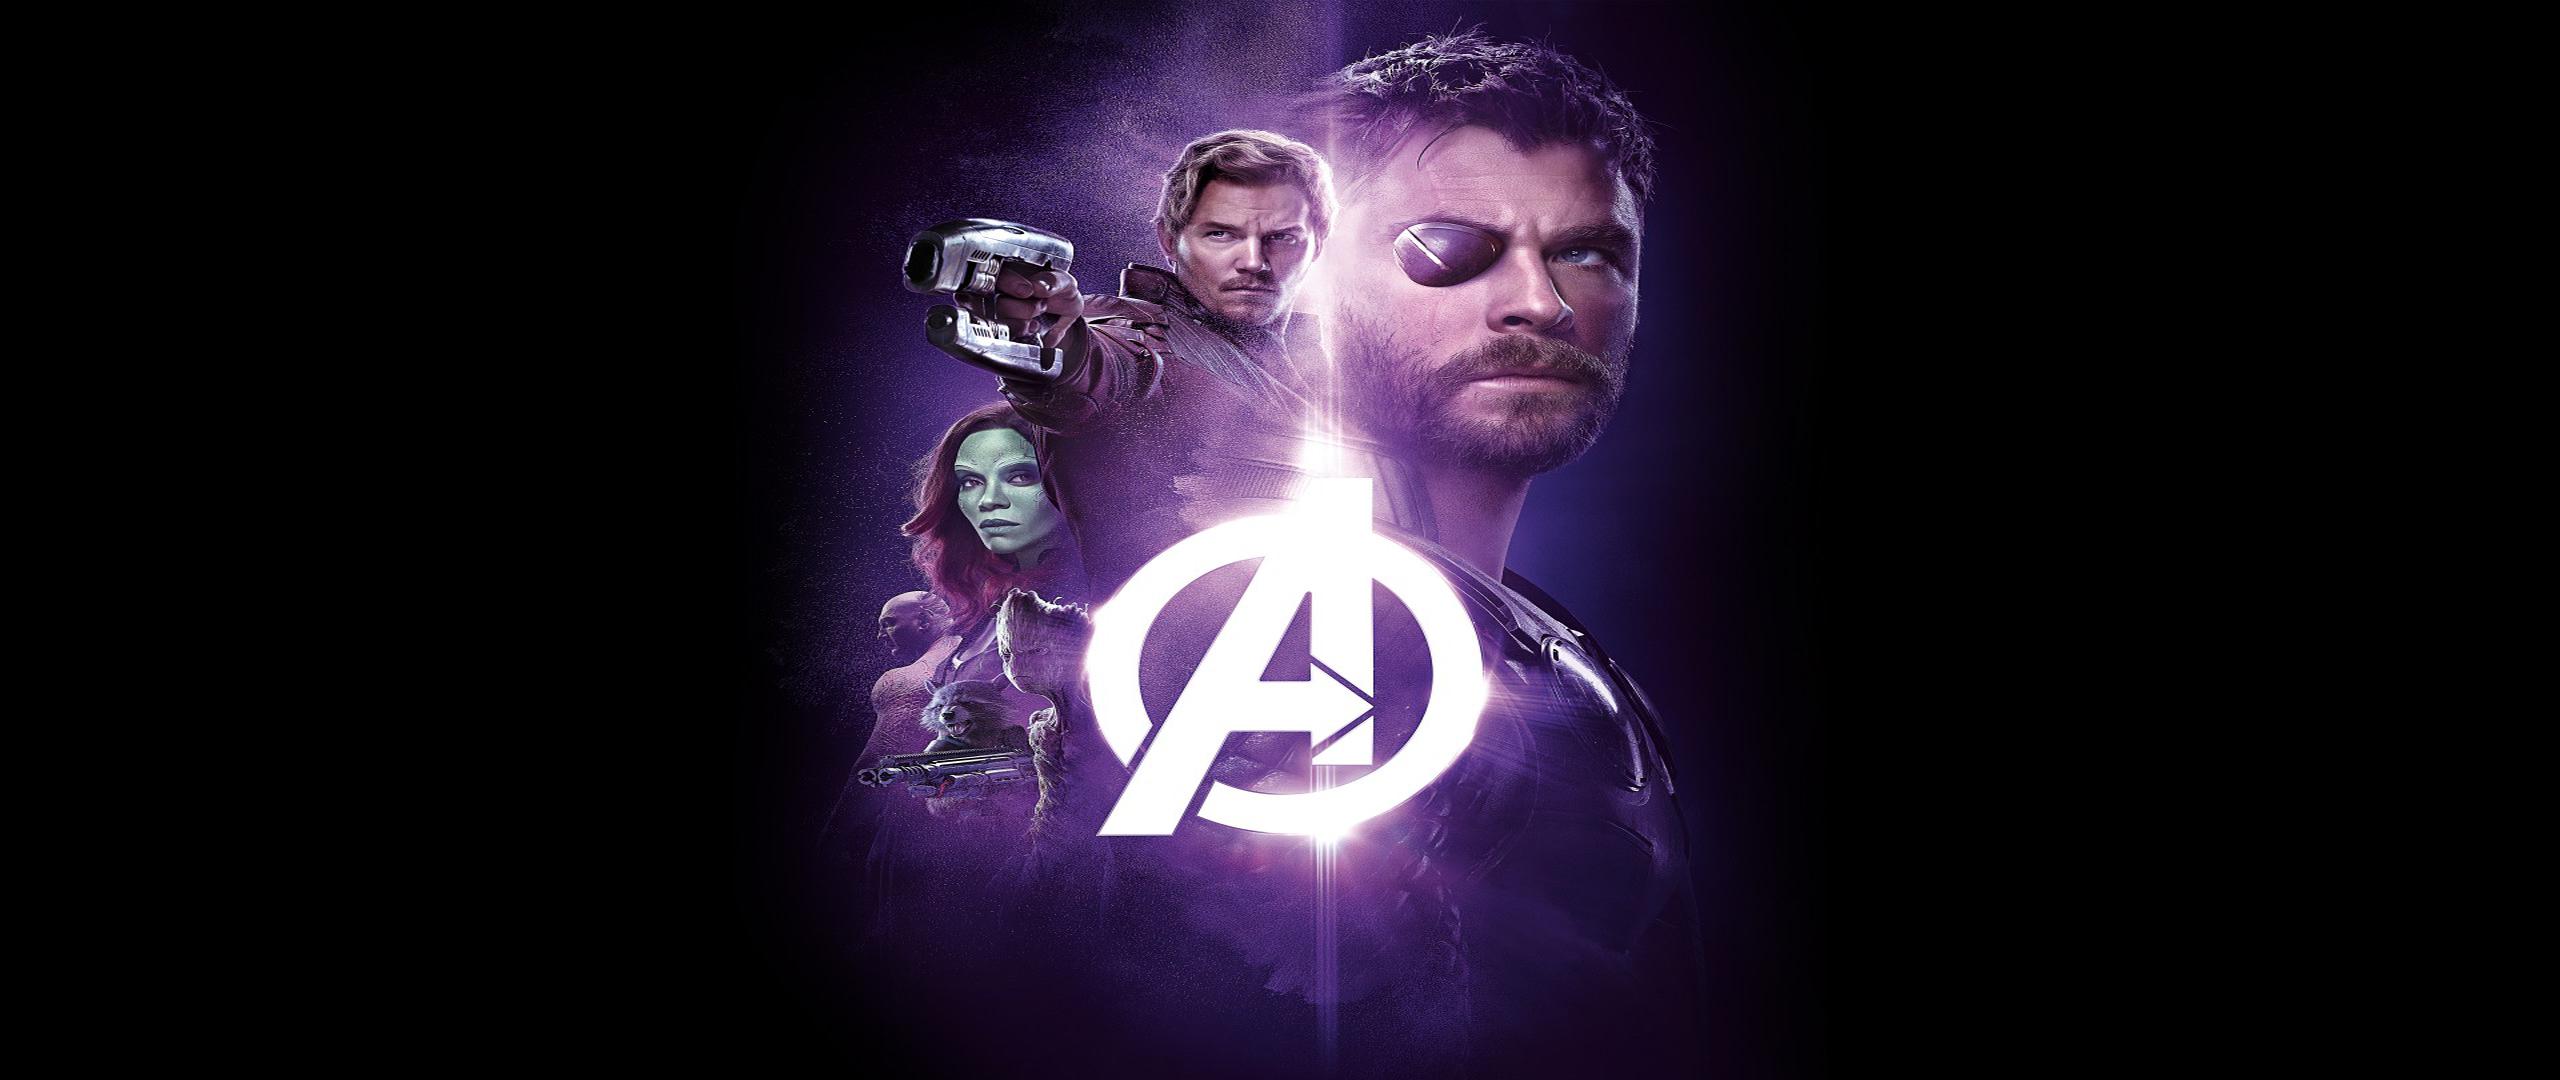 Avengers Infinity War 2018 Power Stone Poster Wallpapers